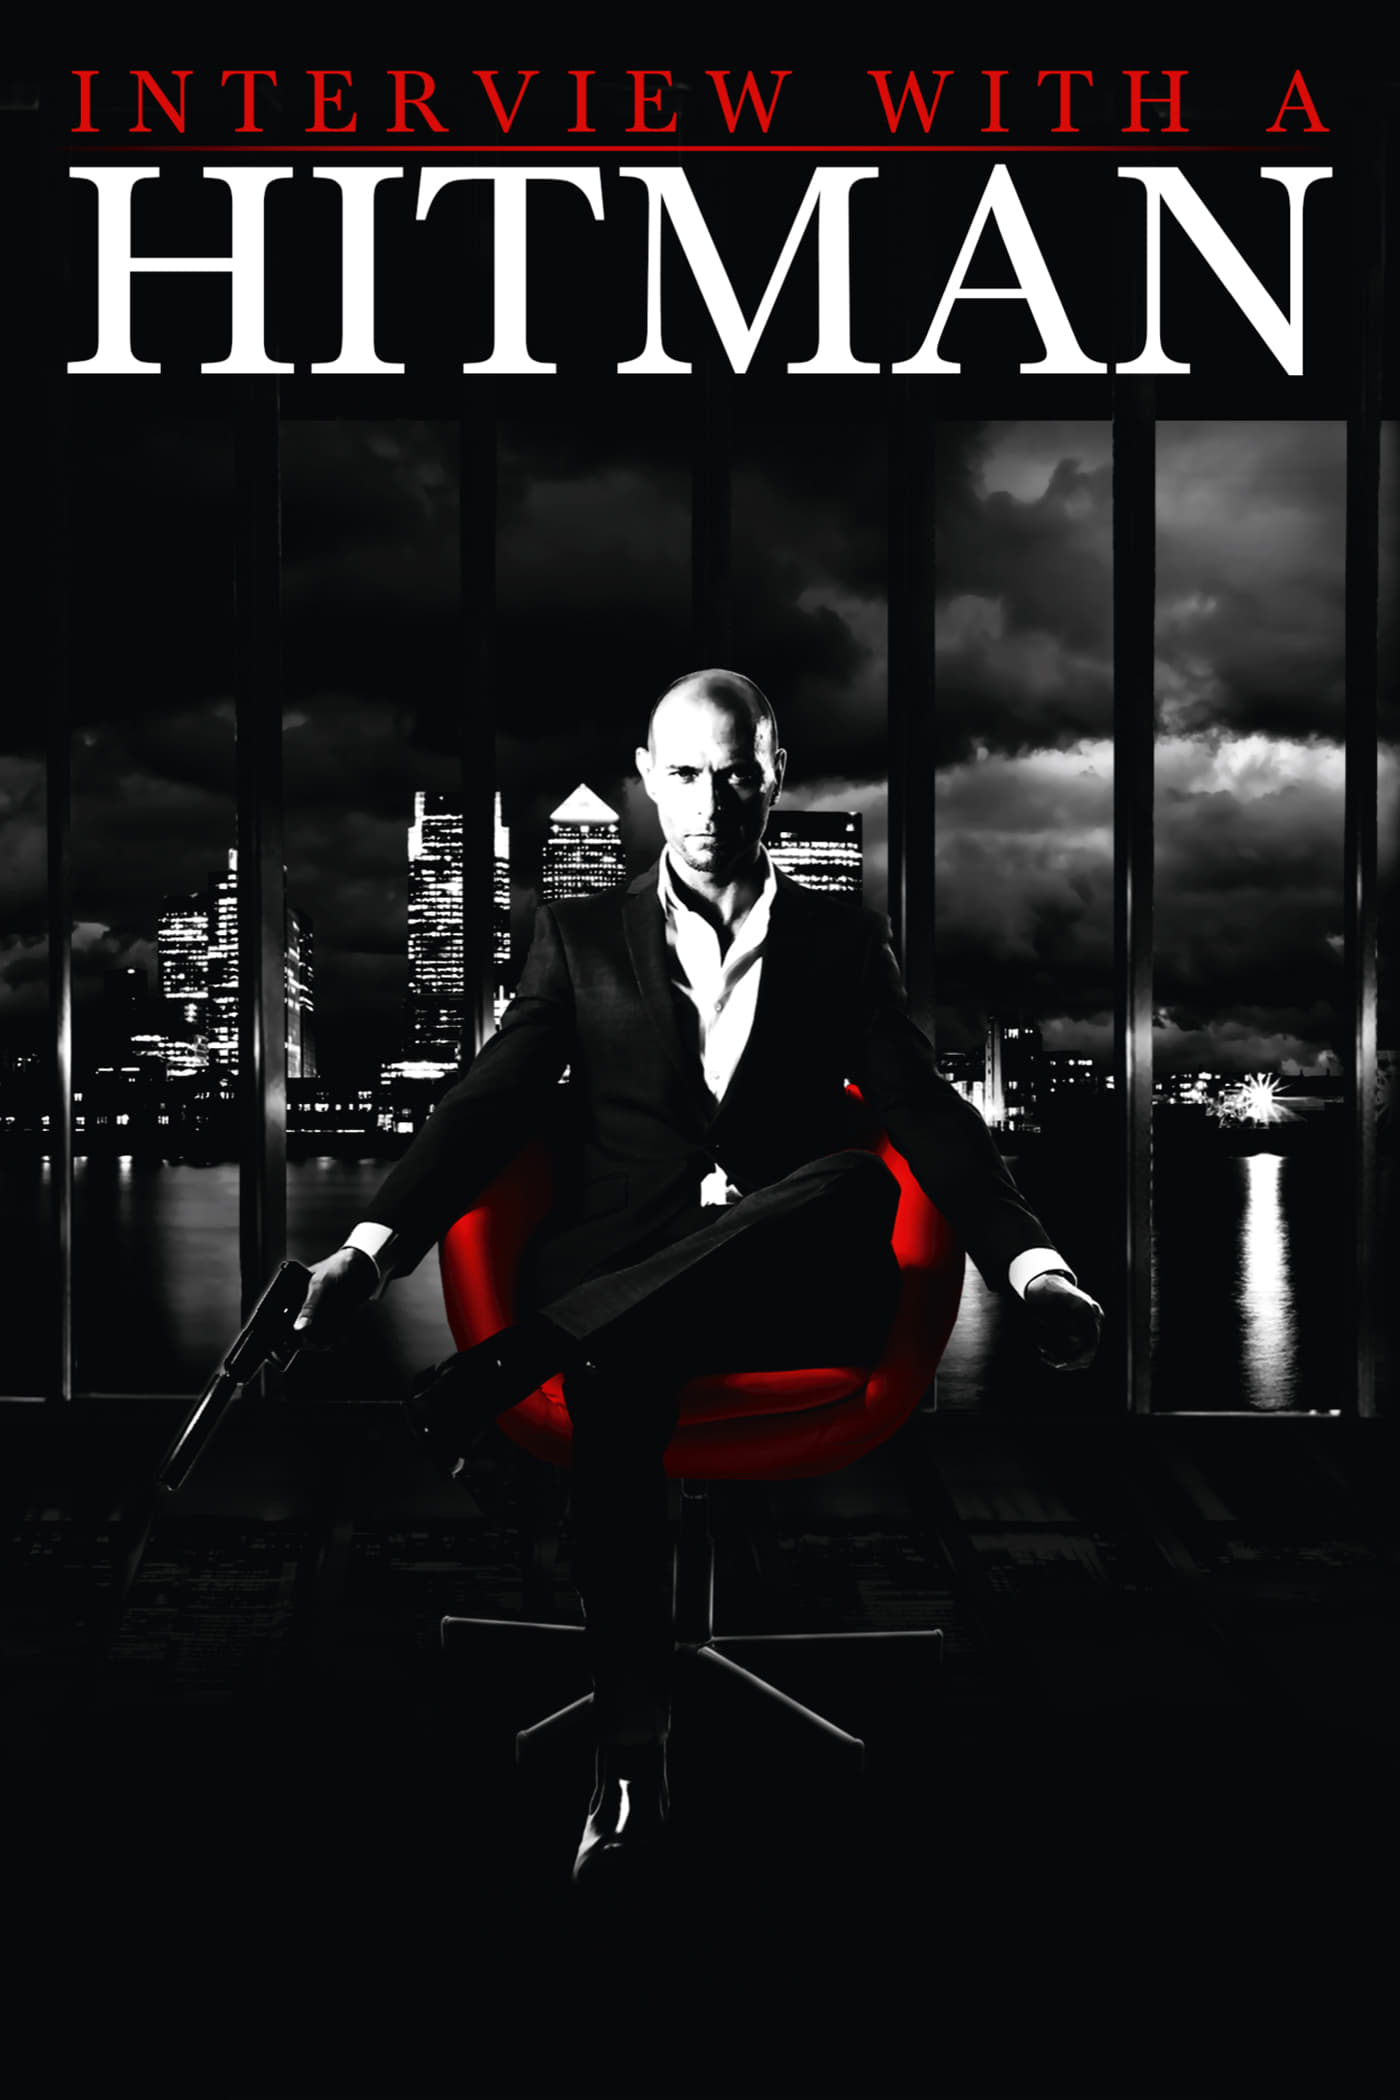 Phỏng Vấn Sát Thủ (Interview with a Hitman) [2012]